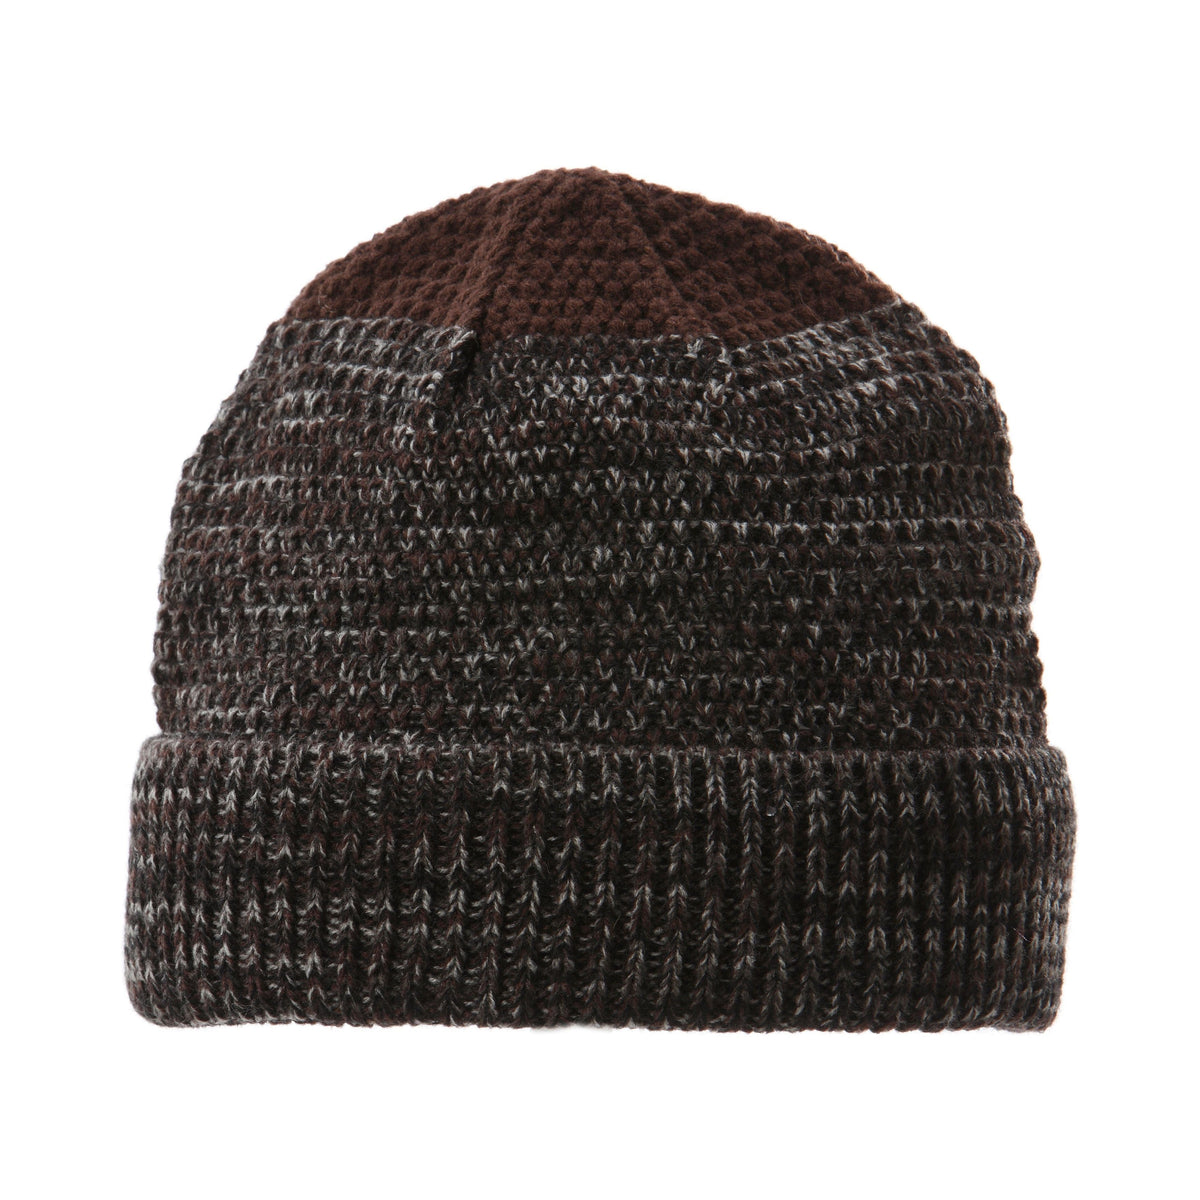 Screamer - A beanie Graham use comfy long-lasting for – made Gear super